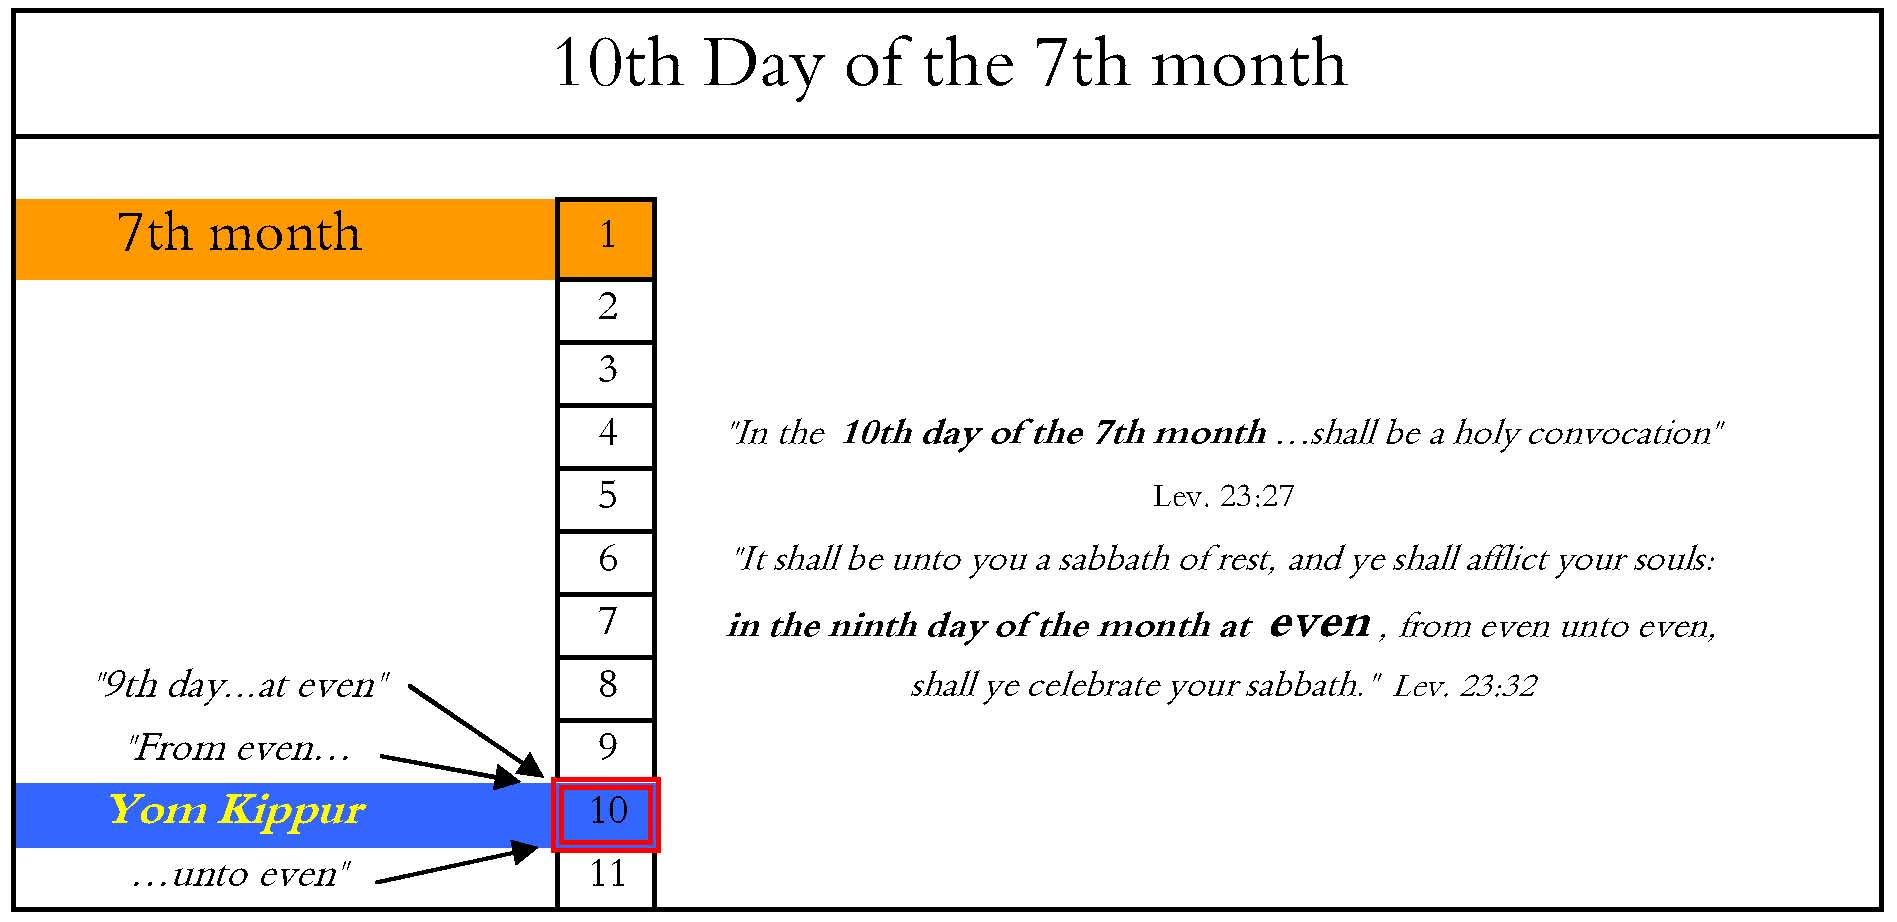 The 10th day - begining on the 9th at 